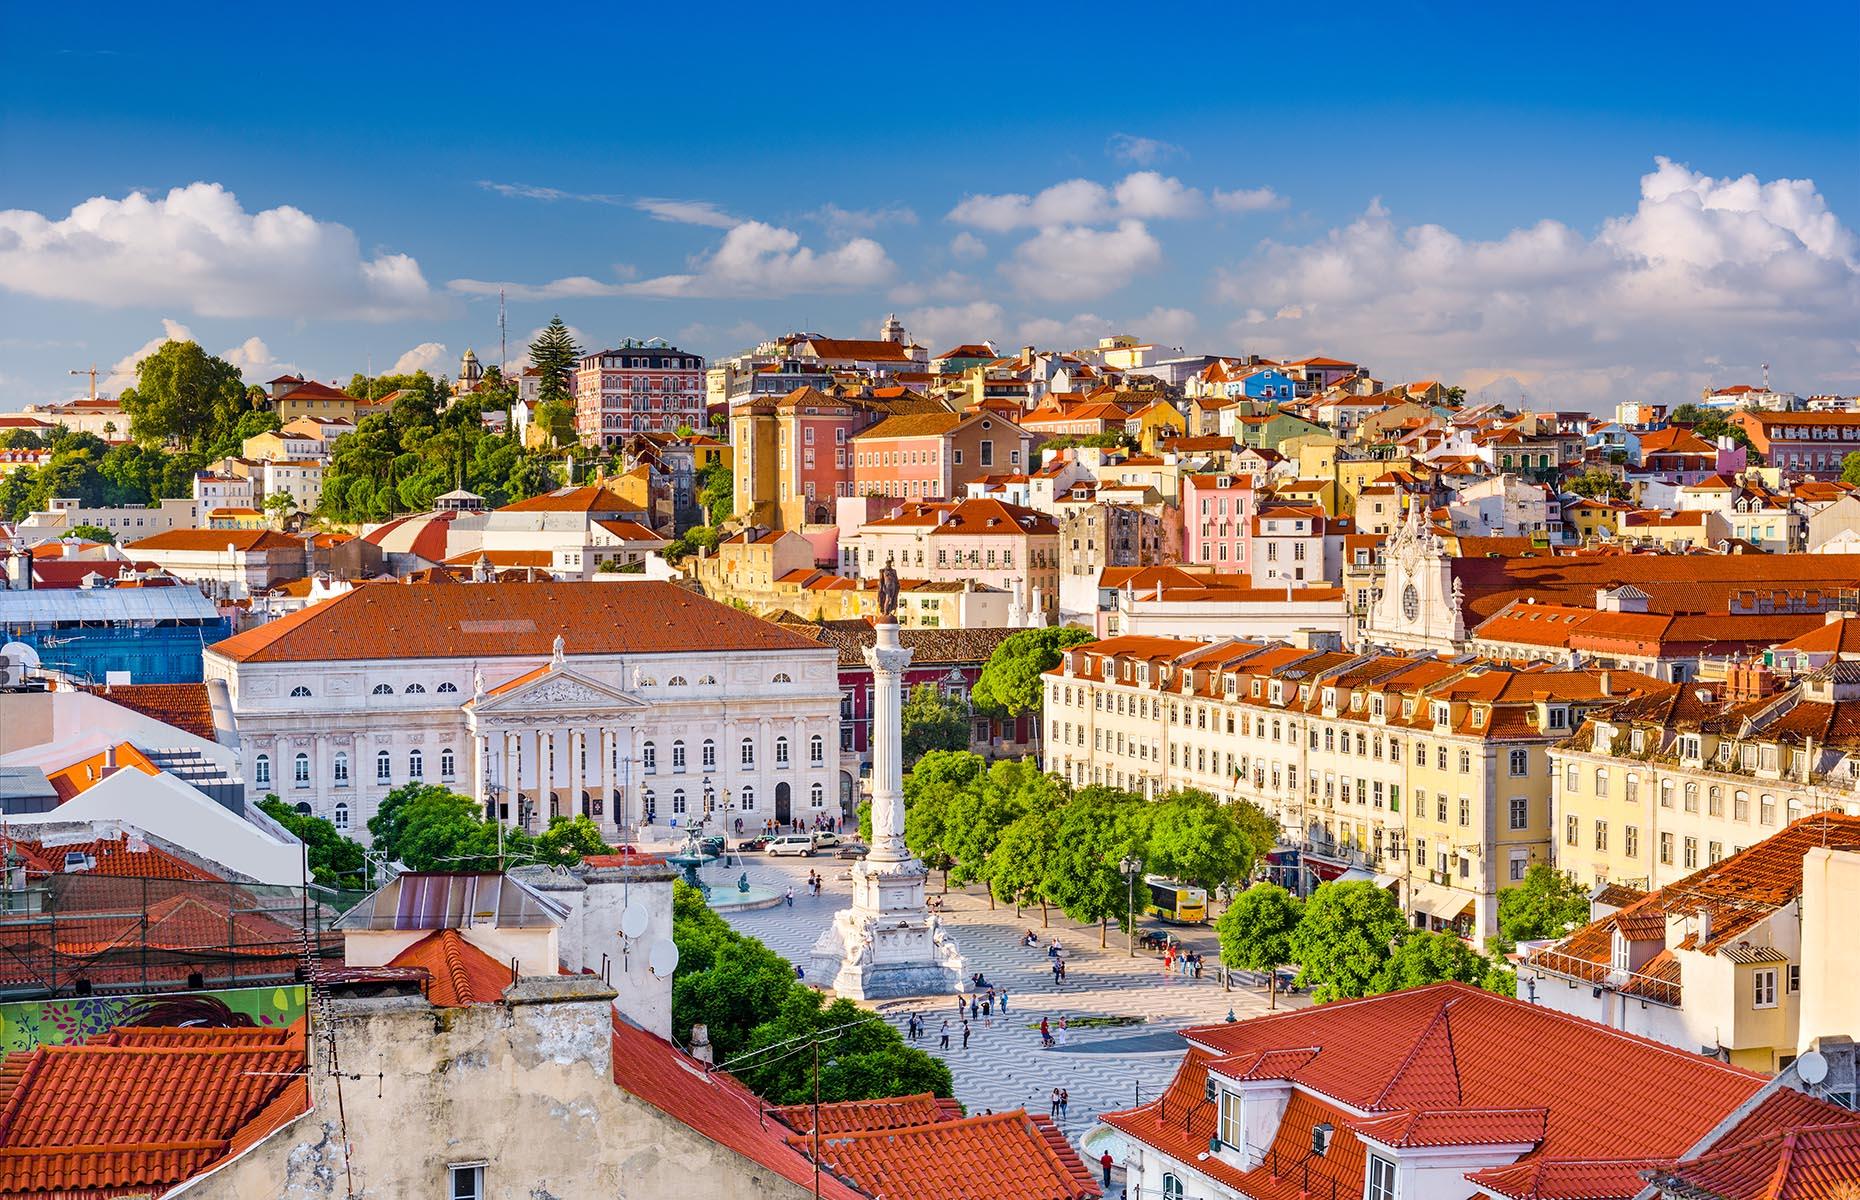 <p>From the breathtaking Belém Tower to the stunning Castelo de São Jorge, <a href="http://www.loveexploring.com/guides/69830/what-to-do-in-lisbon-tourist-attractions">Lisbon</a> has a variety of sights. Past the historic old town squares and avenues lie a charming selection of modern Portuguese restaurants as well as long-running establishments and bars. Easily reached from Lisbon is the fairy-tale Pena Palace – a multi-coloured 19th-century castle in the town of Sintra. Discover <a href="https://www.loveexploring.com/galleries/95345/rainbow-world-amazing-images-of-earths-most-colourful-natural-wonders">amazing images of Earth's most colourful natural wonders here</a>.</p>